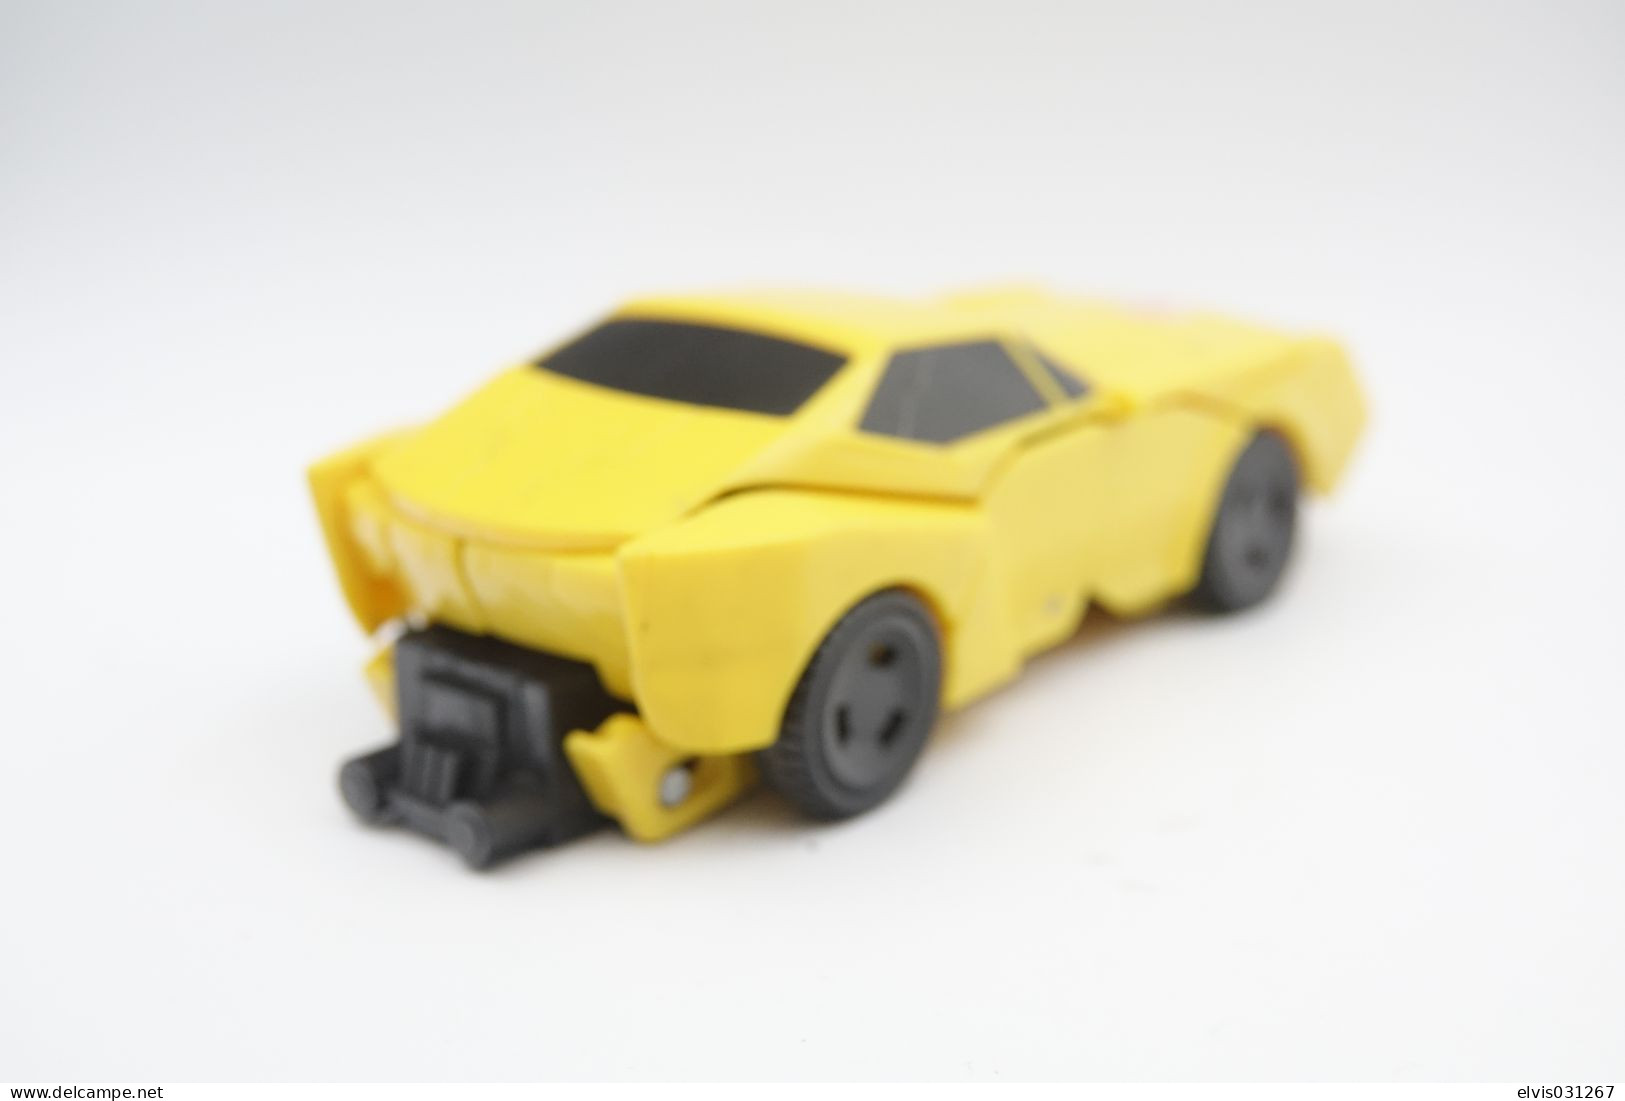 Vintage ACTION FIGURE TRANSFORMERS : ROBOTS IN DISGUISE BUMBLEBEE ONE STEP CHANGER - LOOSE  - Original Hasbro 2015 - Action Man